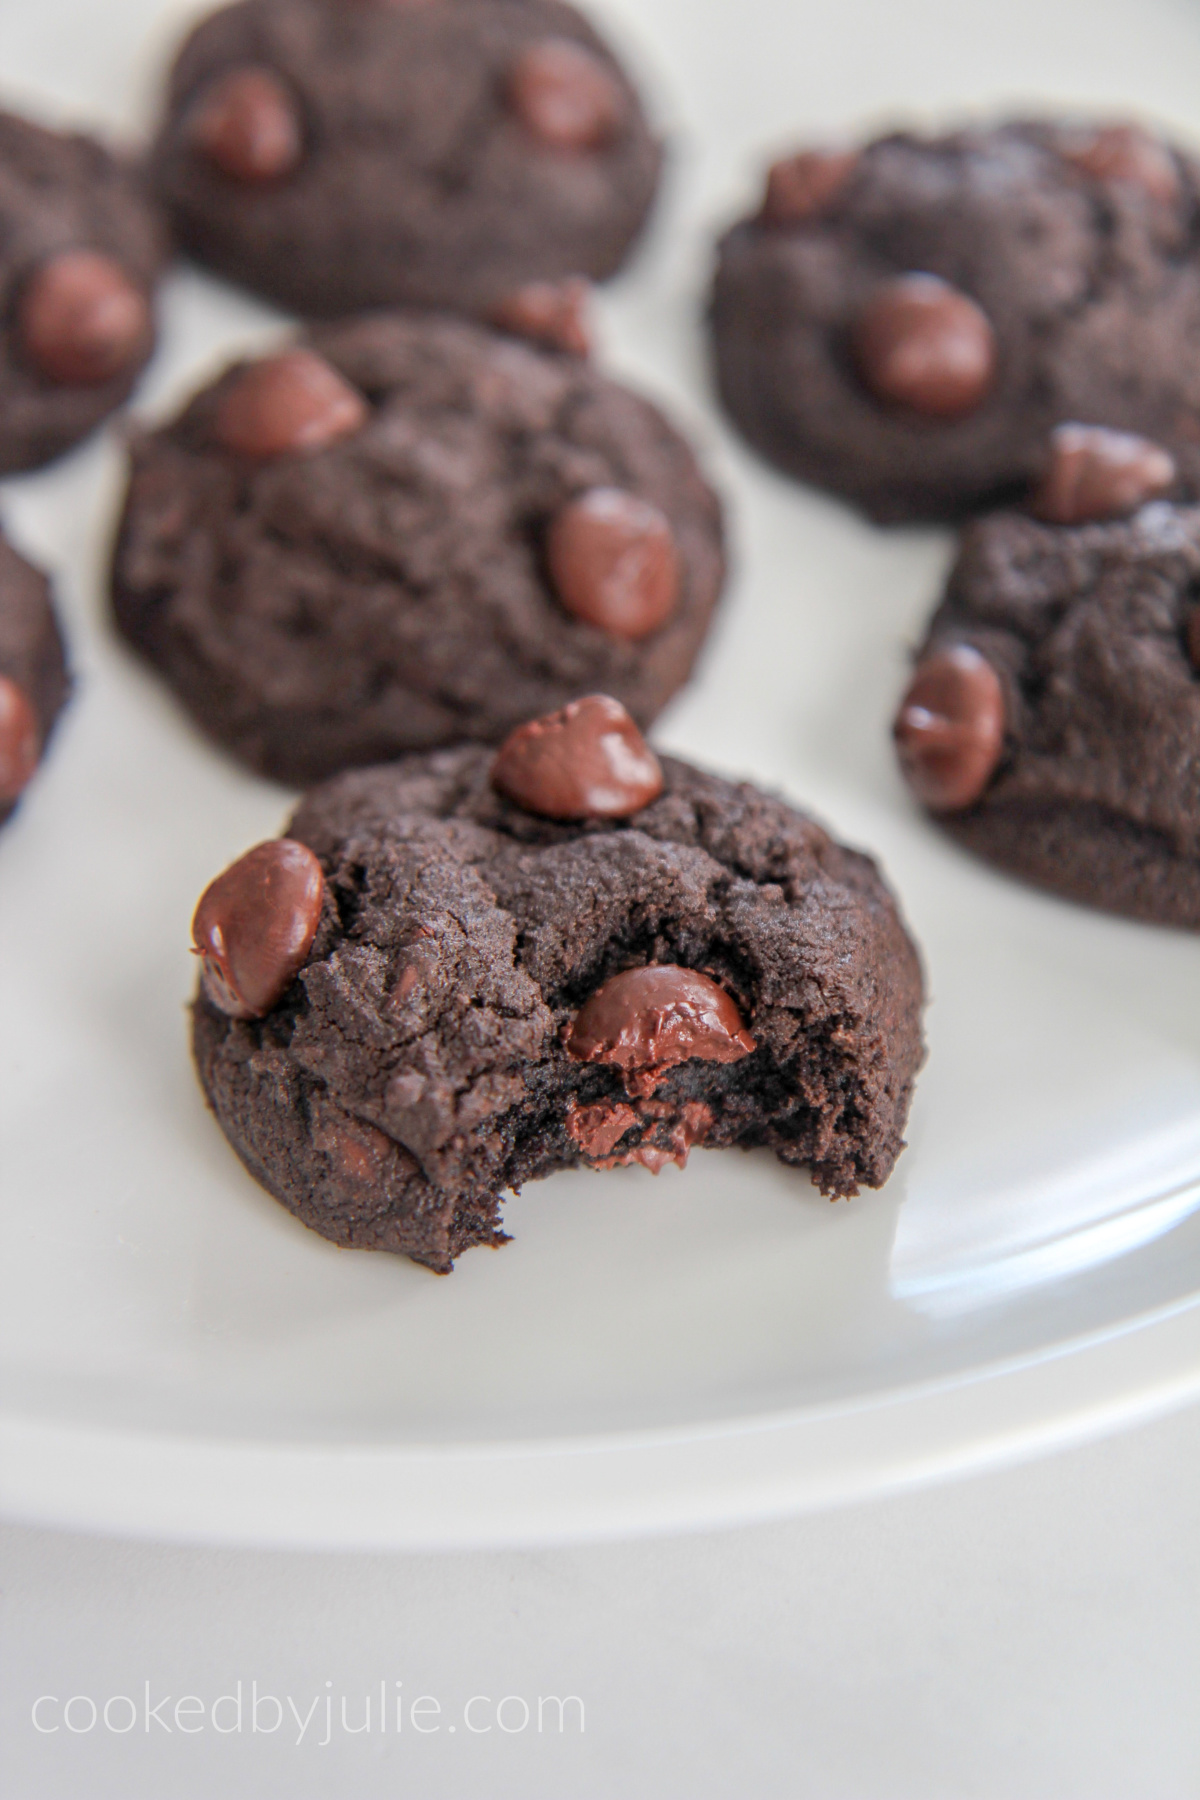 https://www.cookedbyjulie.com/wp-content/uploads/2019/04/double-chocolate-cookies-one.jpg